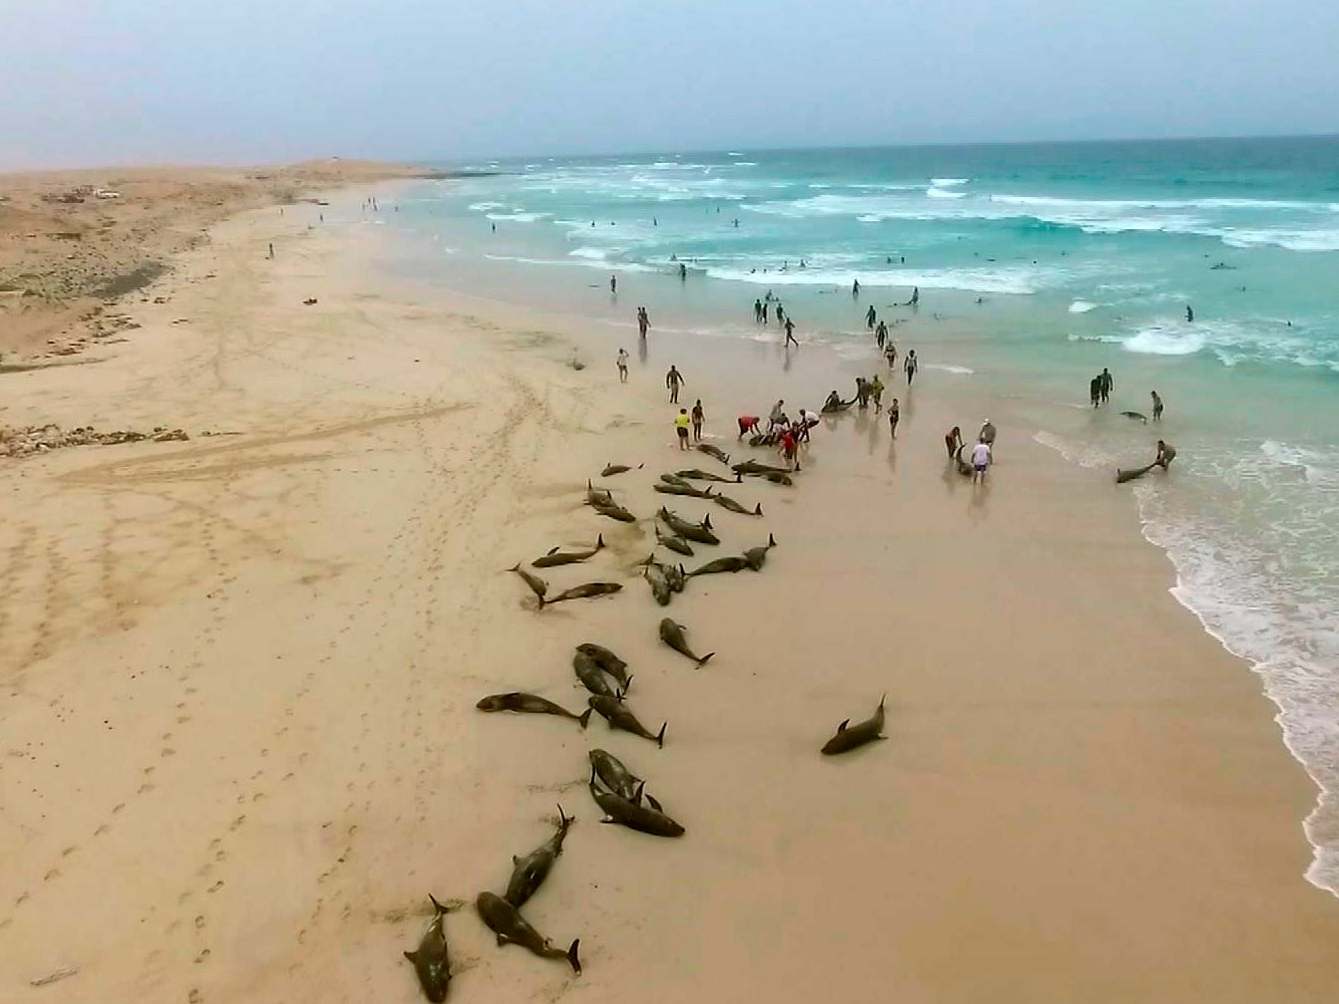 Authorities in the Cape Verde islands are waiting for experts from Spain to help discover why the dolphins washed ashore